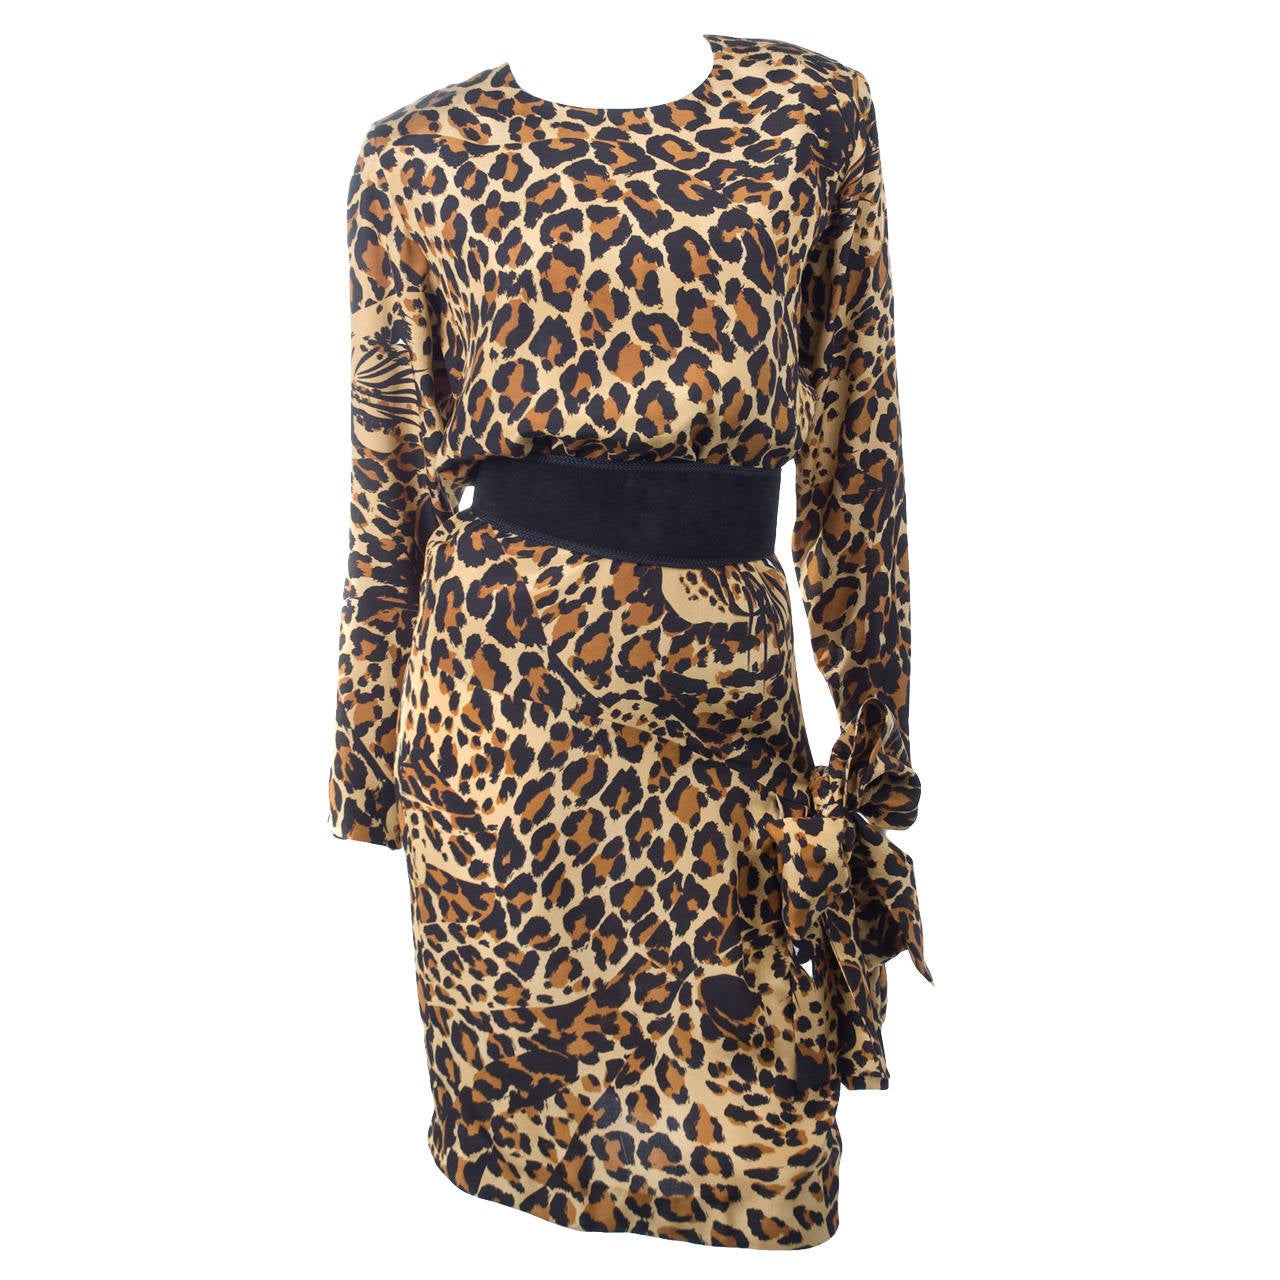 Iconic Yves Saint Laurent Leopard Print Dress For Sale at 1stdibs